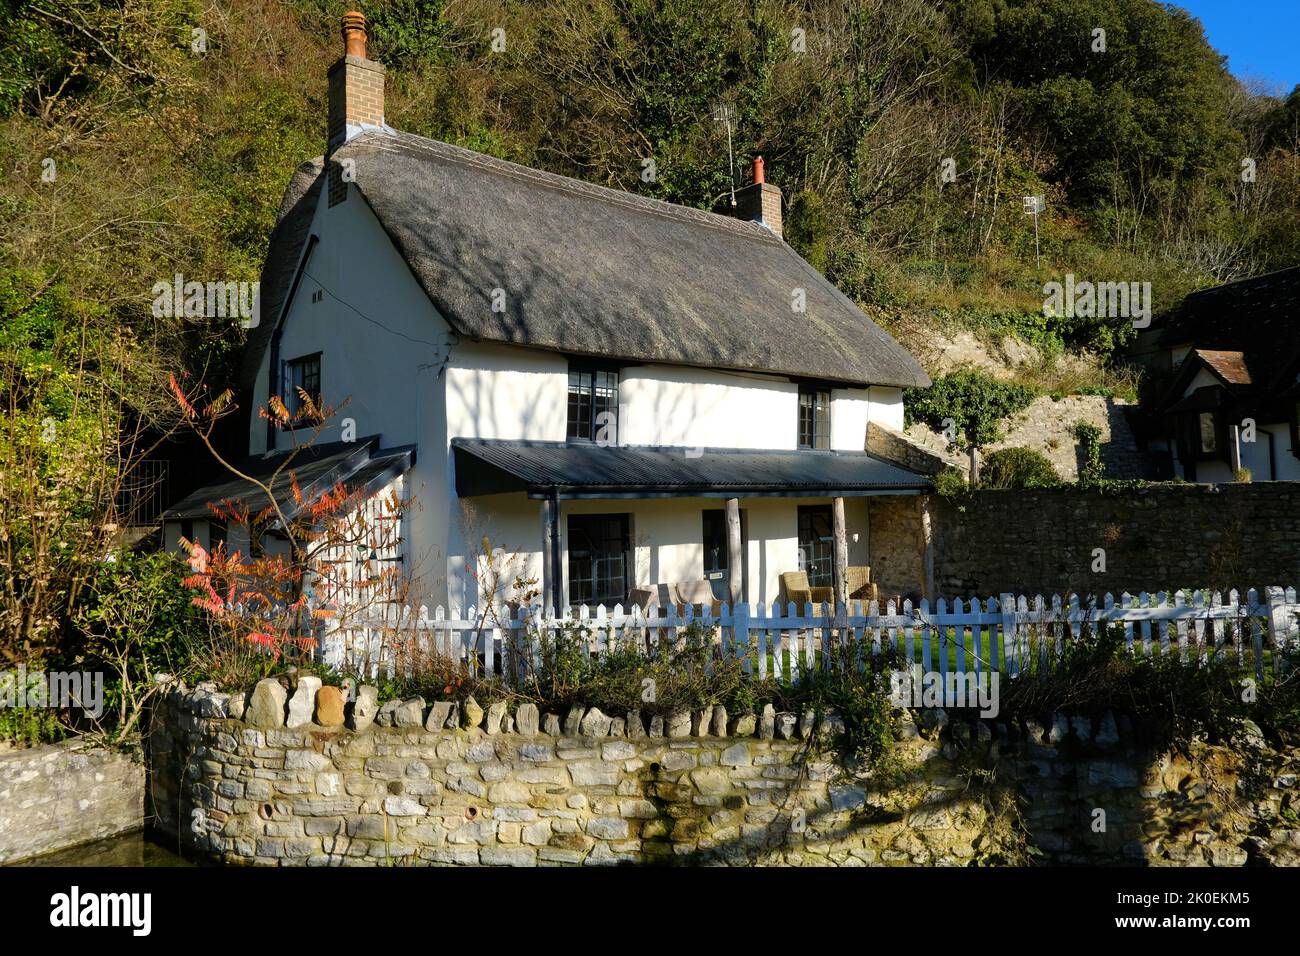 Thatched cottage at Lulworth Cove, Dorset, UK - John Gollop Stock Photo